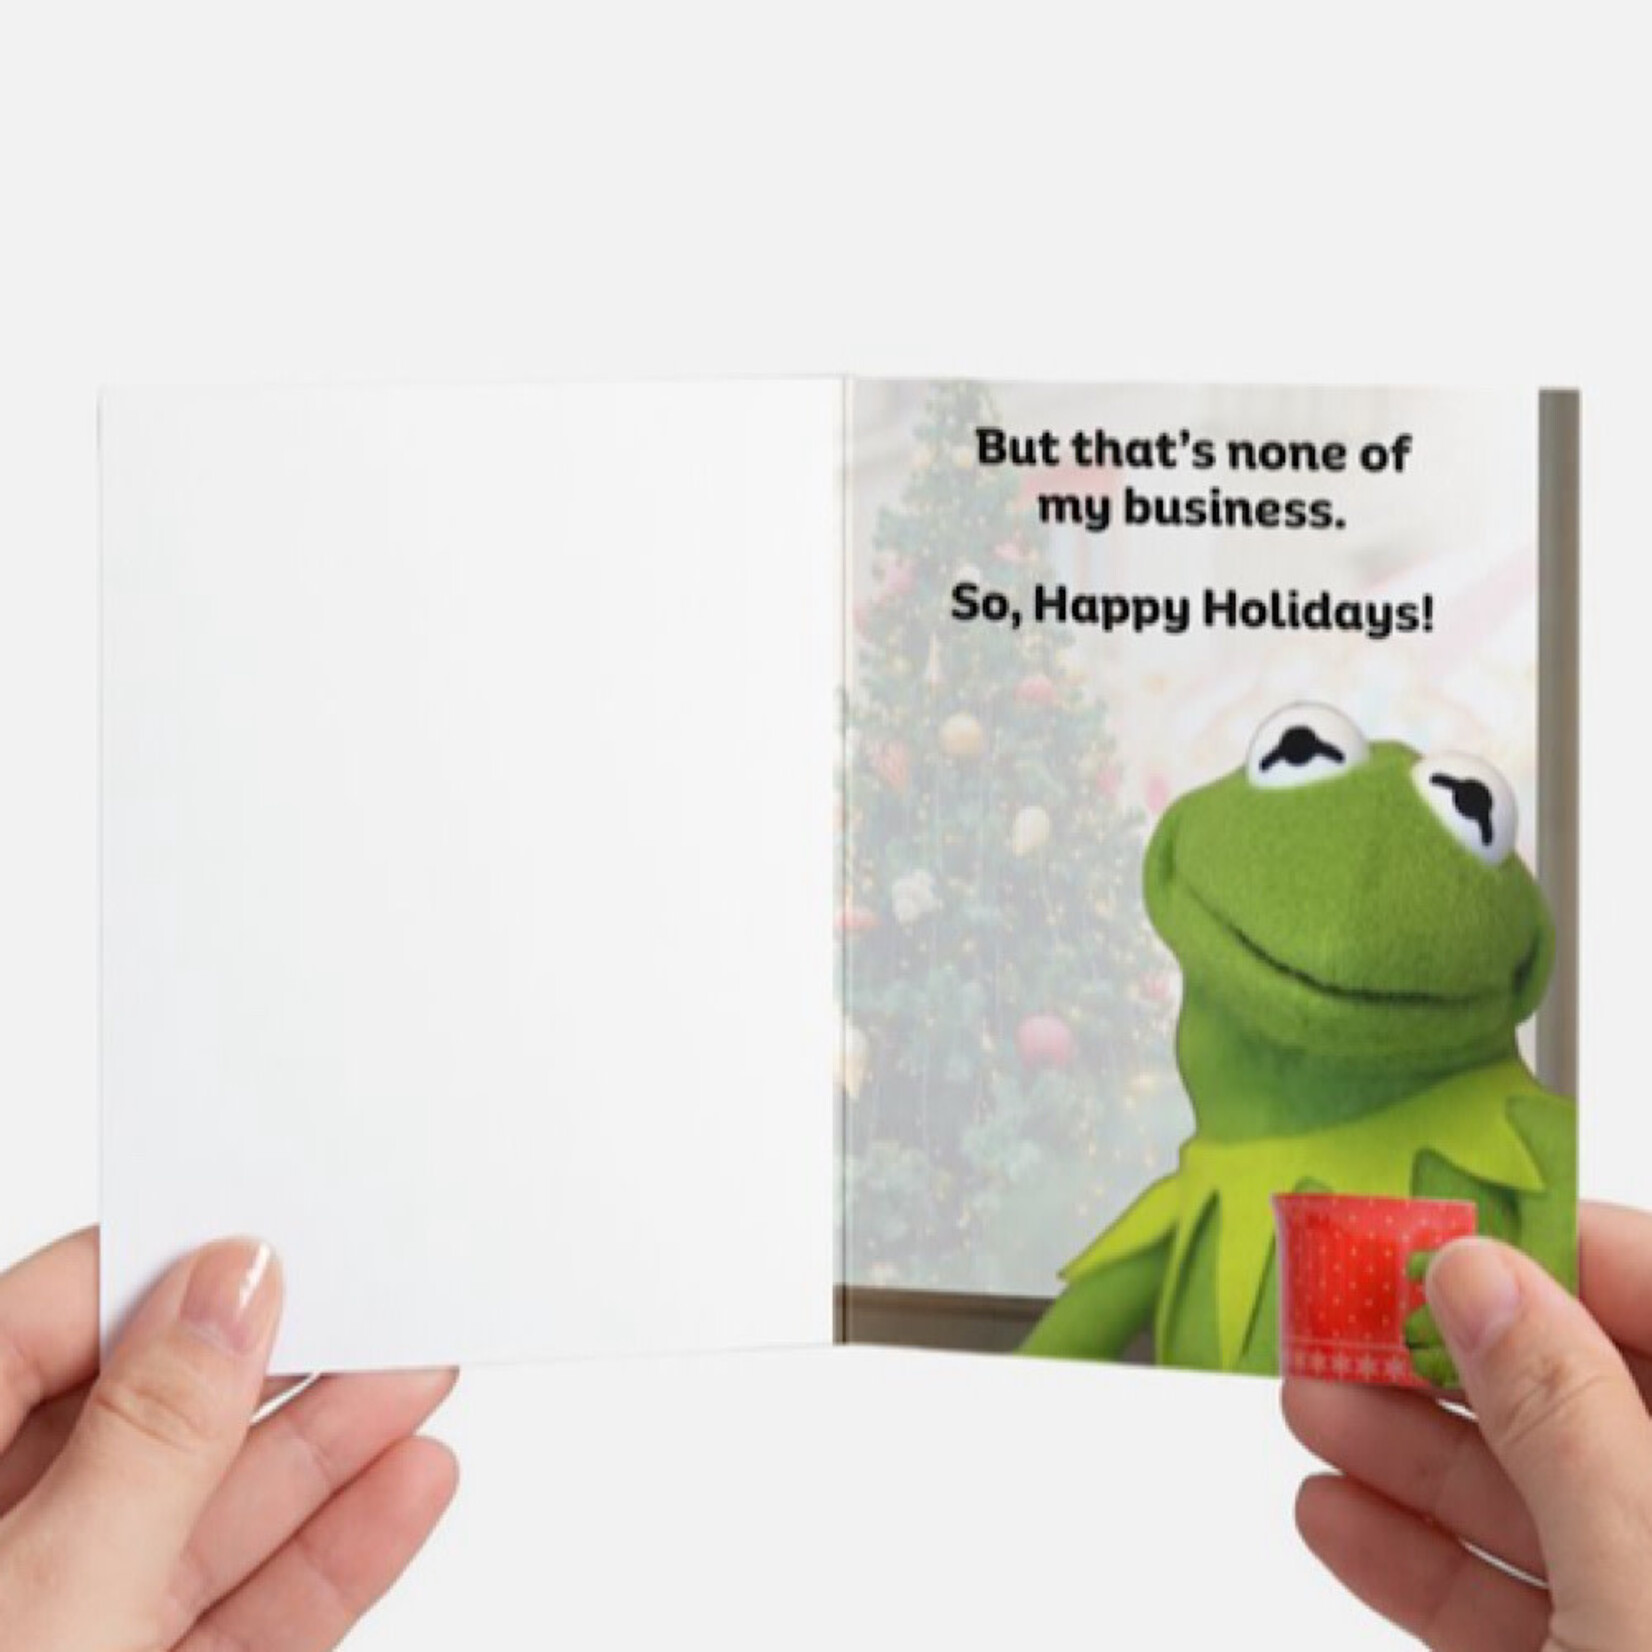 Bad Annie’s Card (Holiday) - I Heard What You Were Up To This Year But That’s None Of My Business So Happy Holidays (Kermit The Frog)